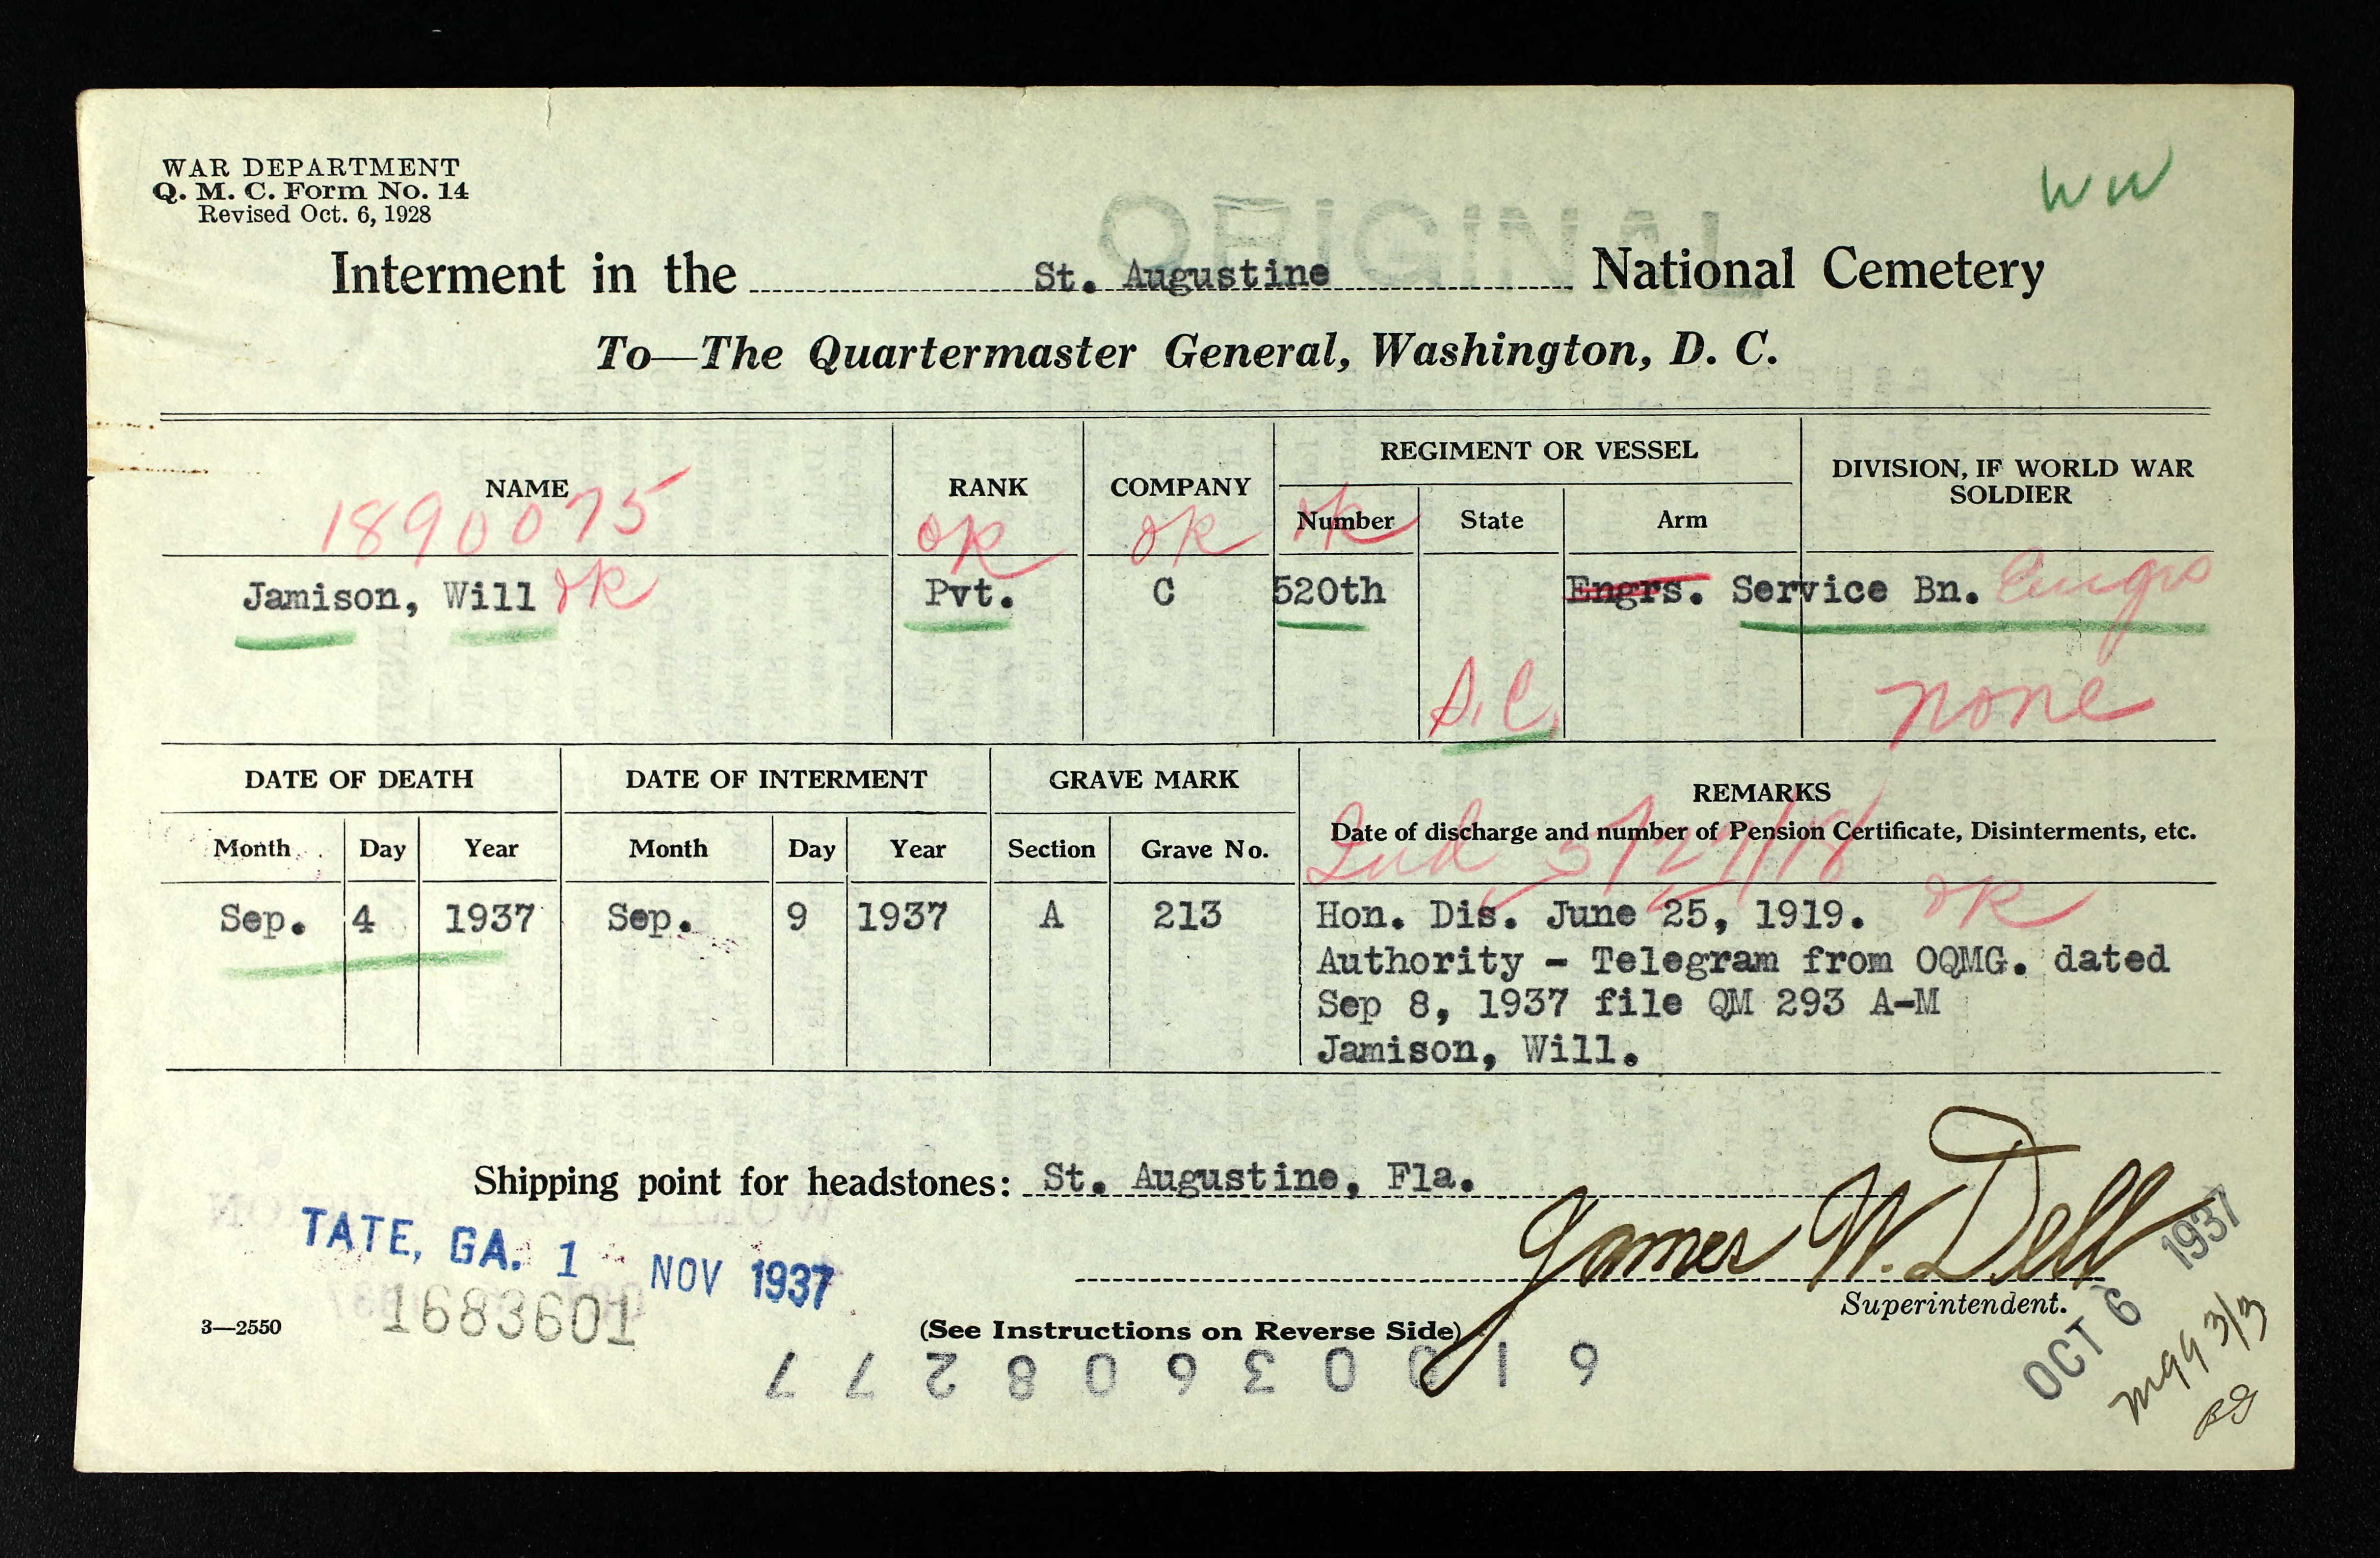 Internement Card for Will Jamison